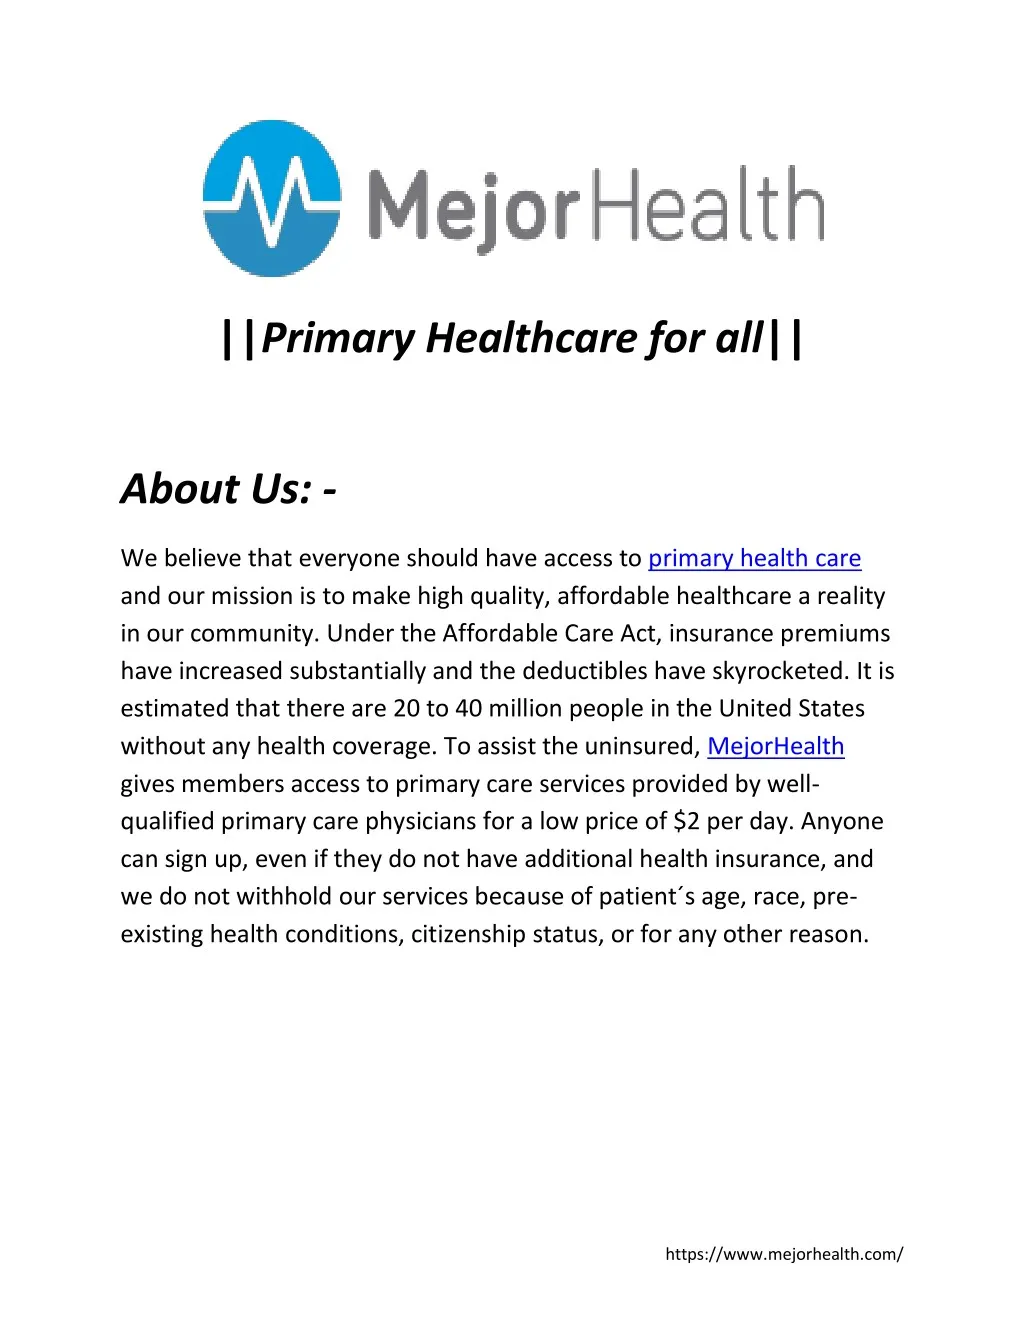 primary healthcare for all